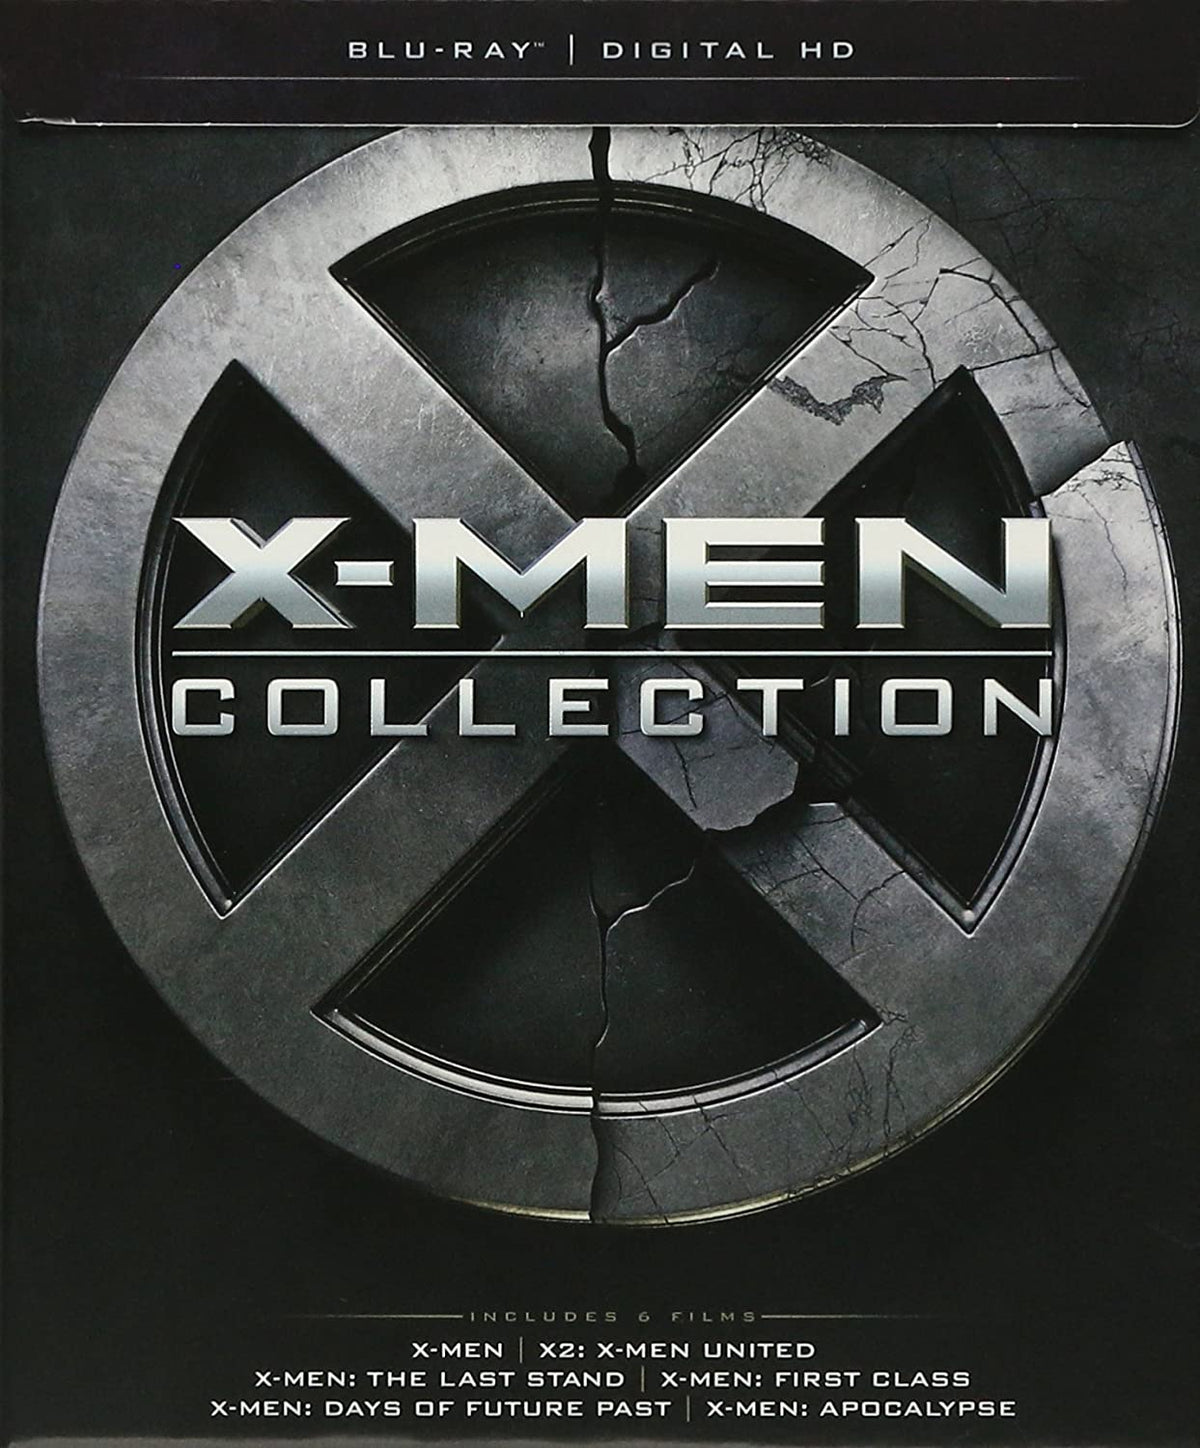 X-men Collection [Blu-ray]